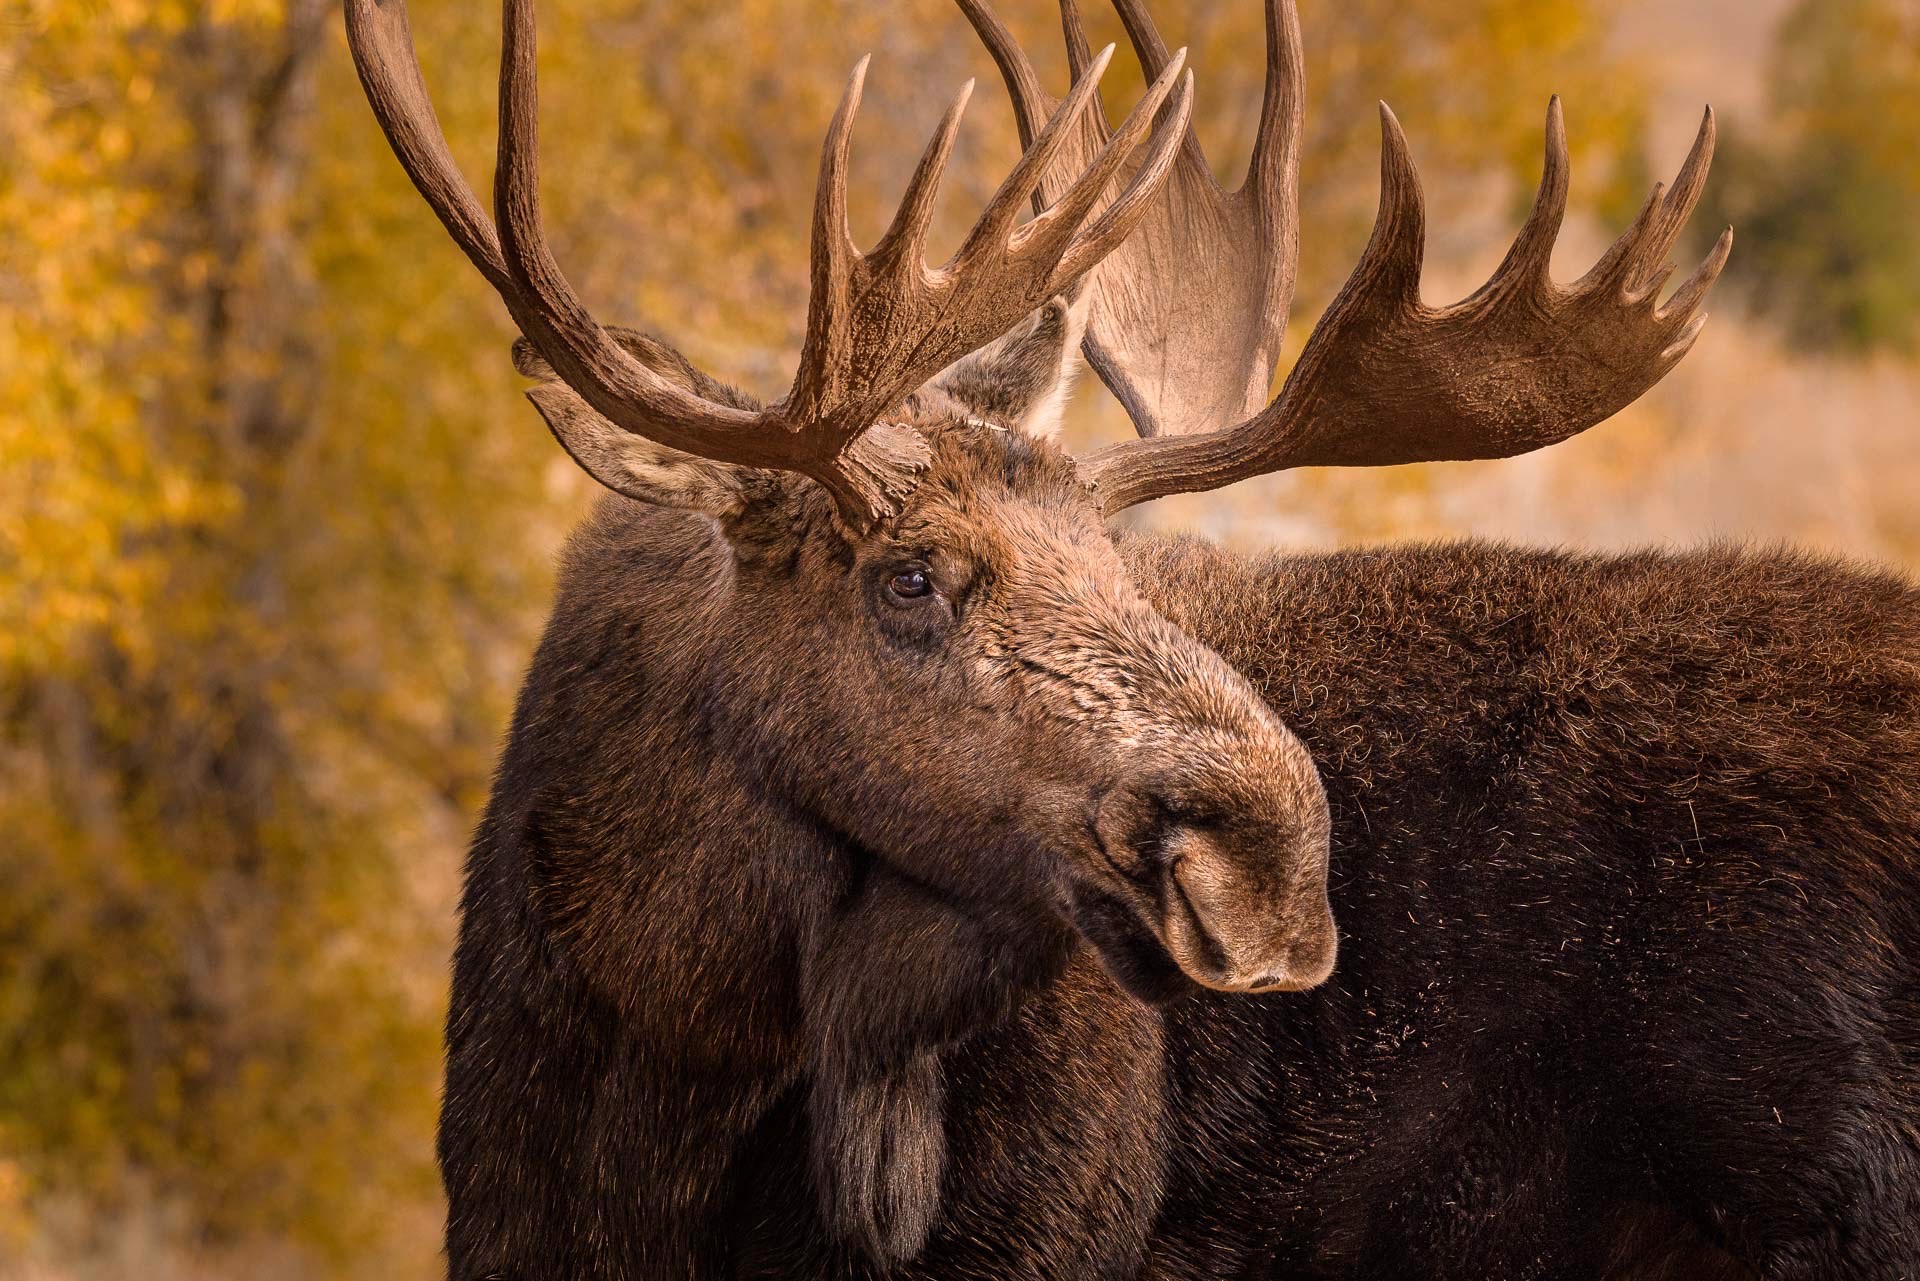 Original Limited Edition Photography Of A Bull Moose In Trees By Dwight Vasel Available At Gallery Wild